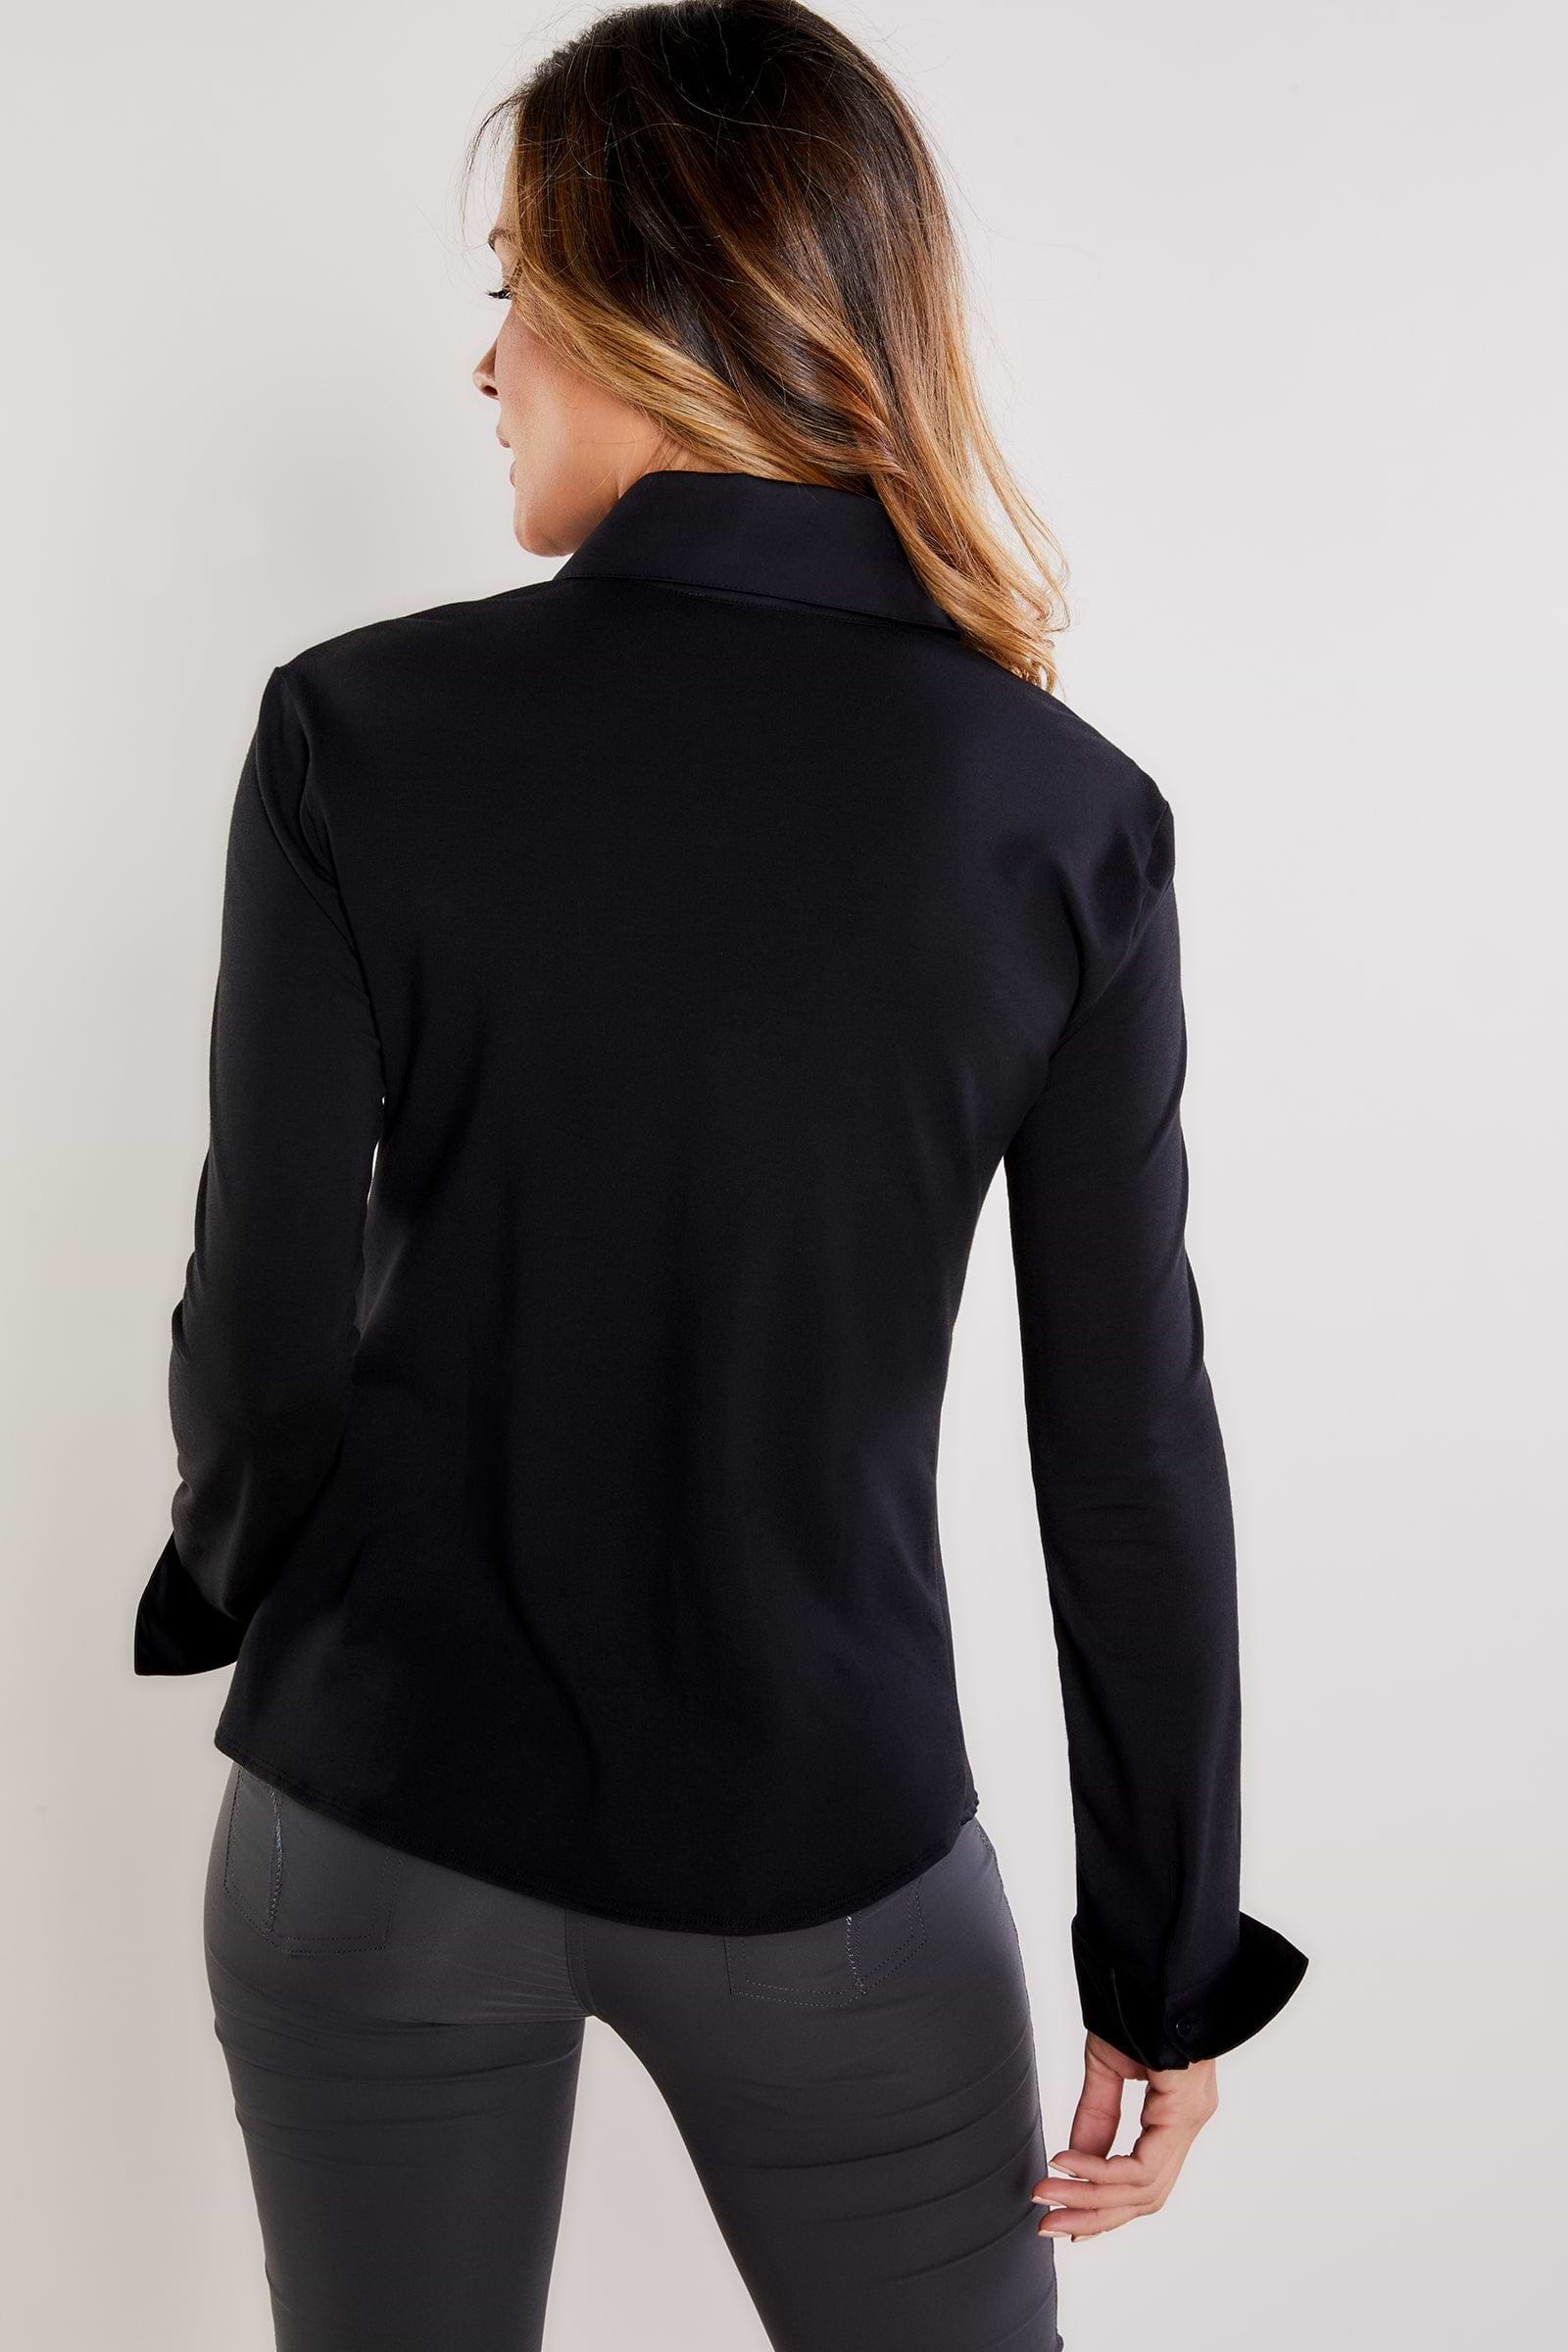 The Best Travel Shirt. Woman Showing the Front Profile of a Alida Button Down Poplin Shirt in Black